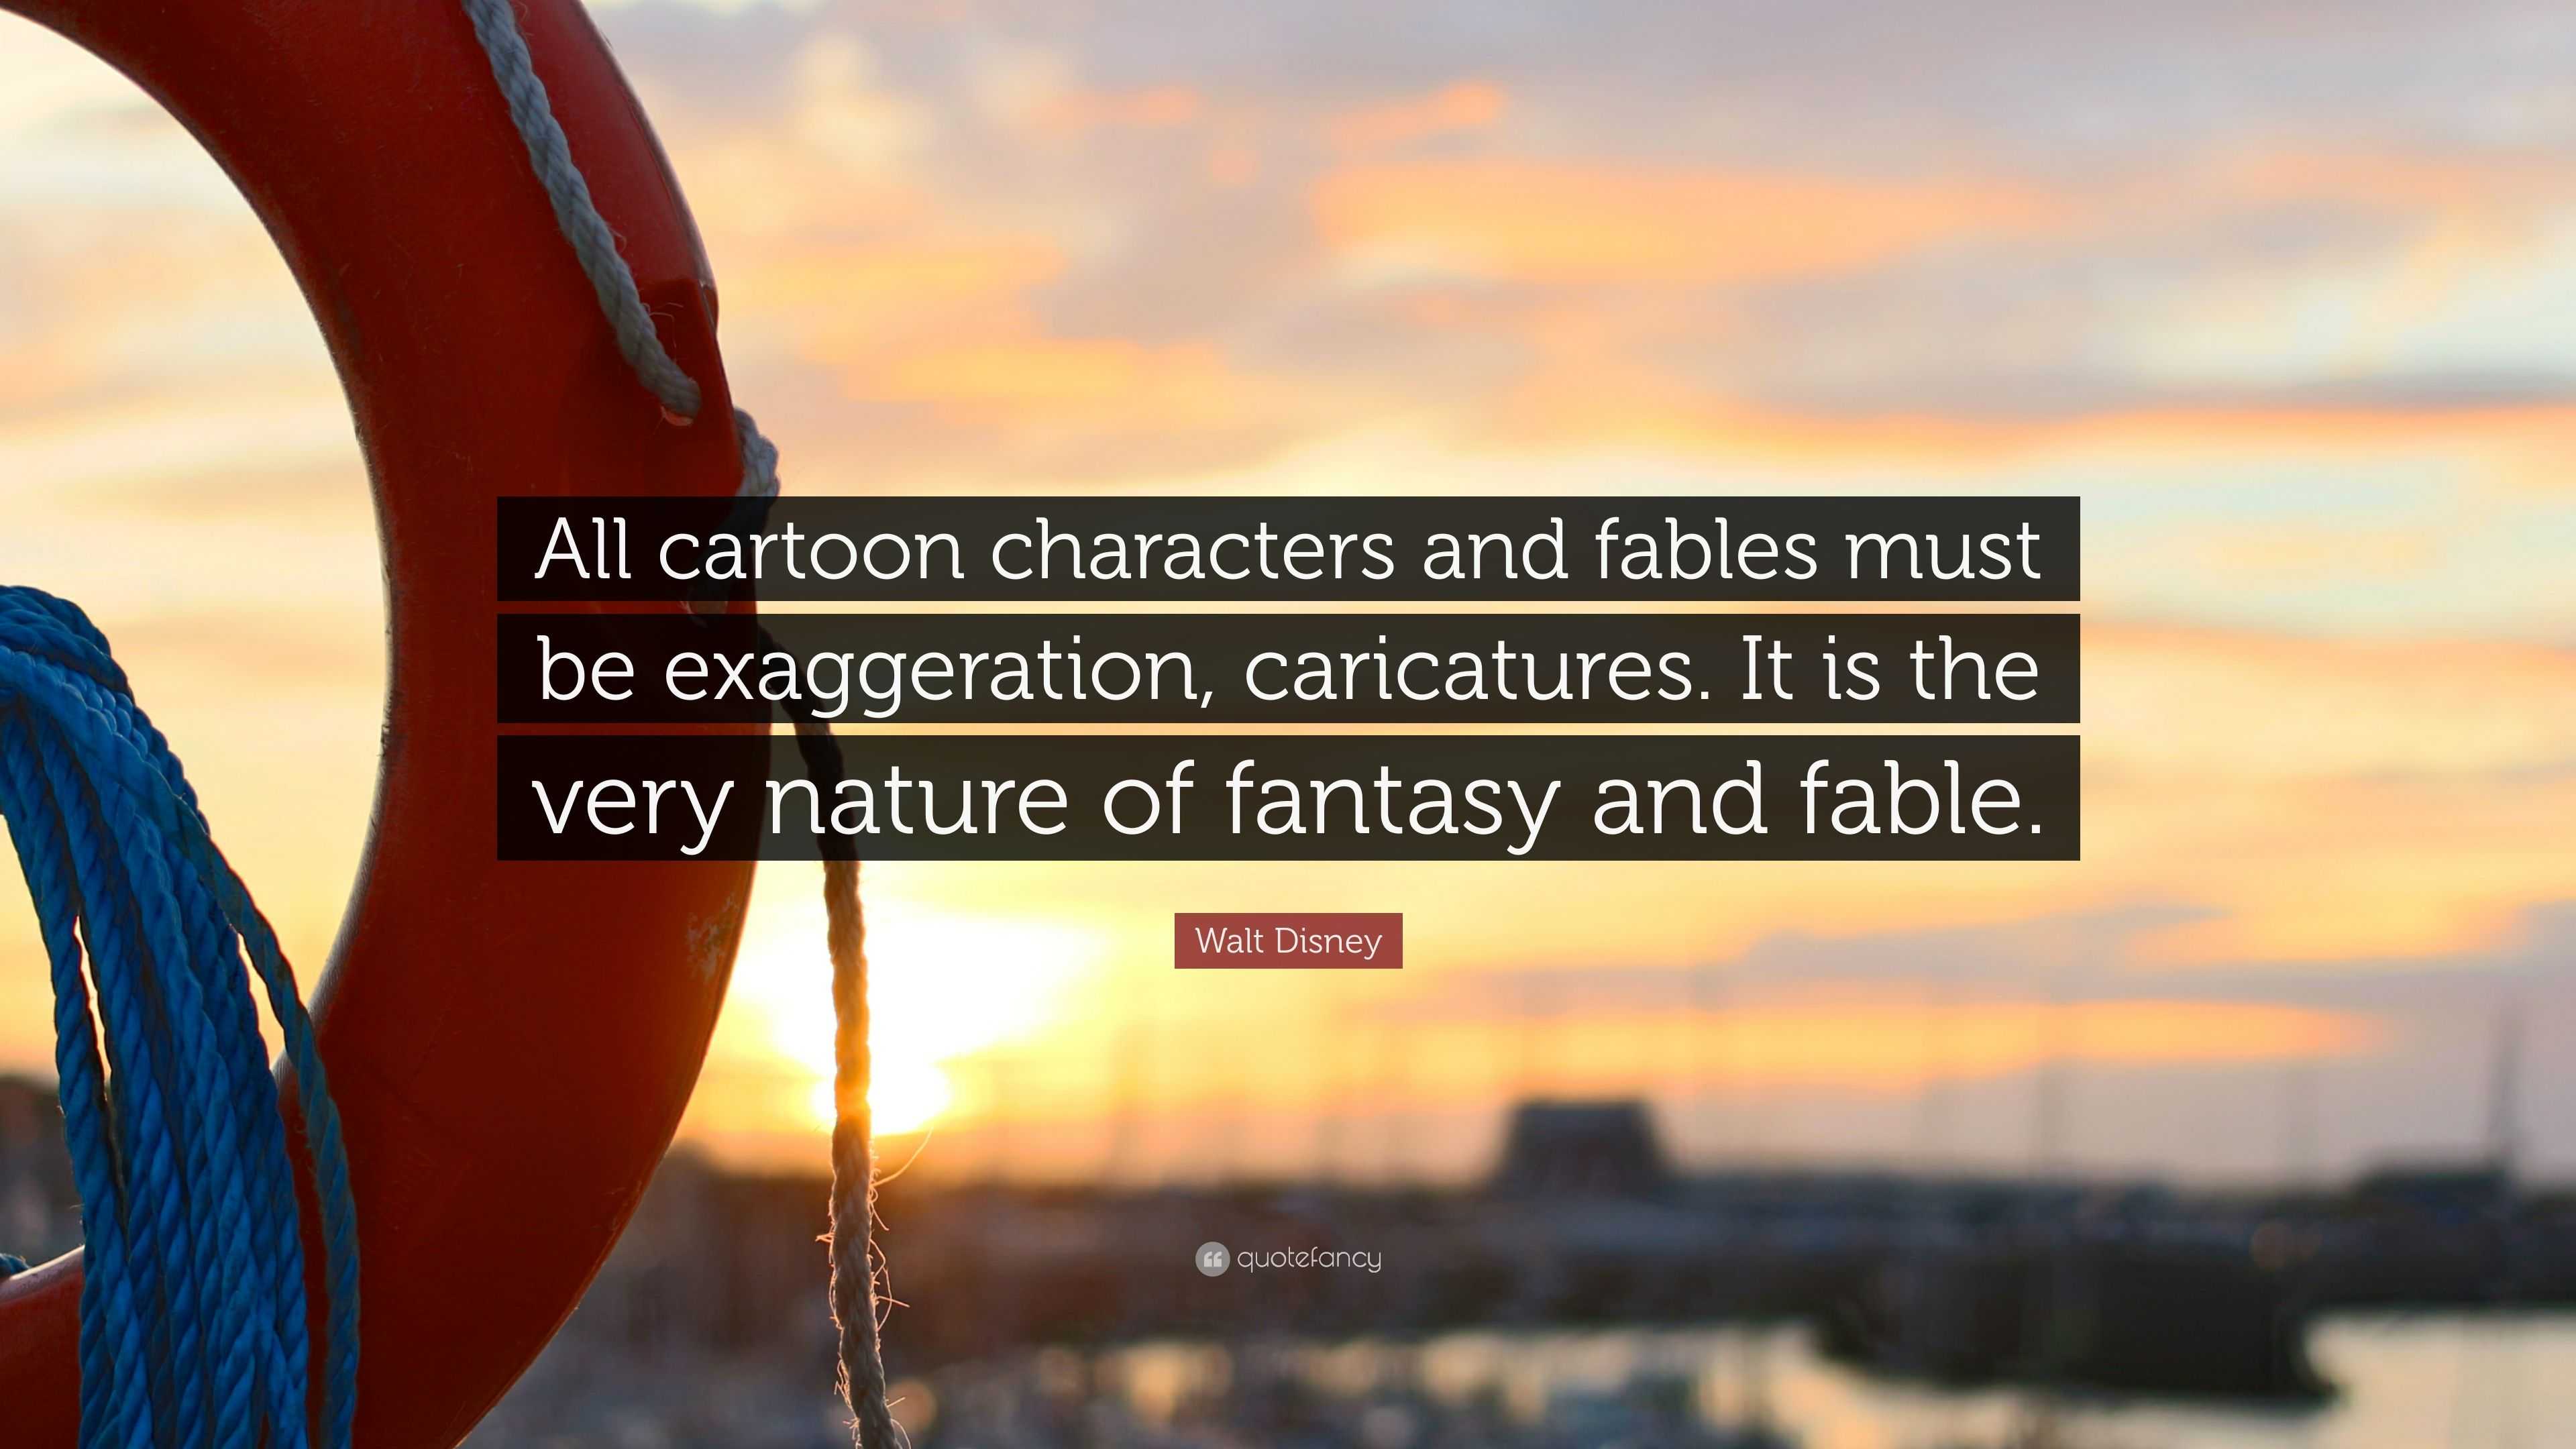 Walt Disney Quote: “All cartoon characters and fables must be exaggeration,  caricatures. It is the very